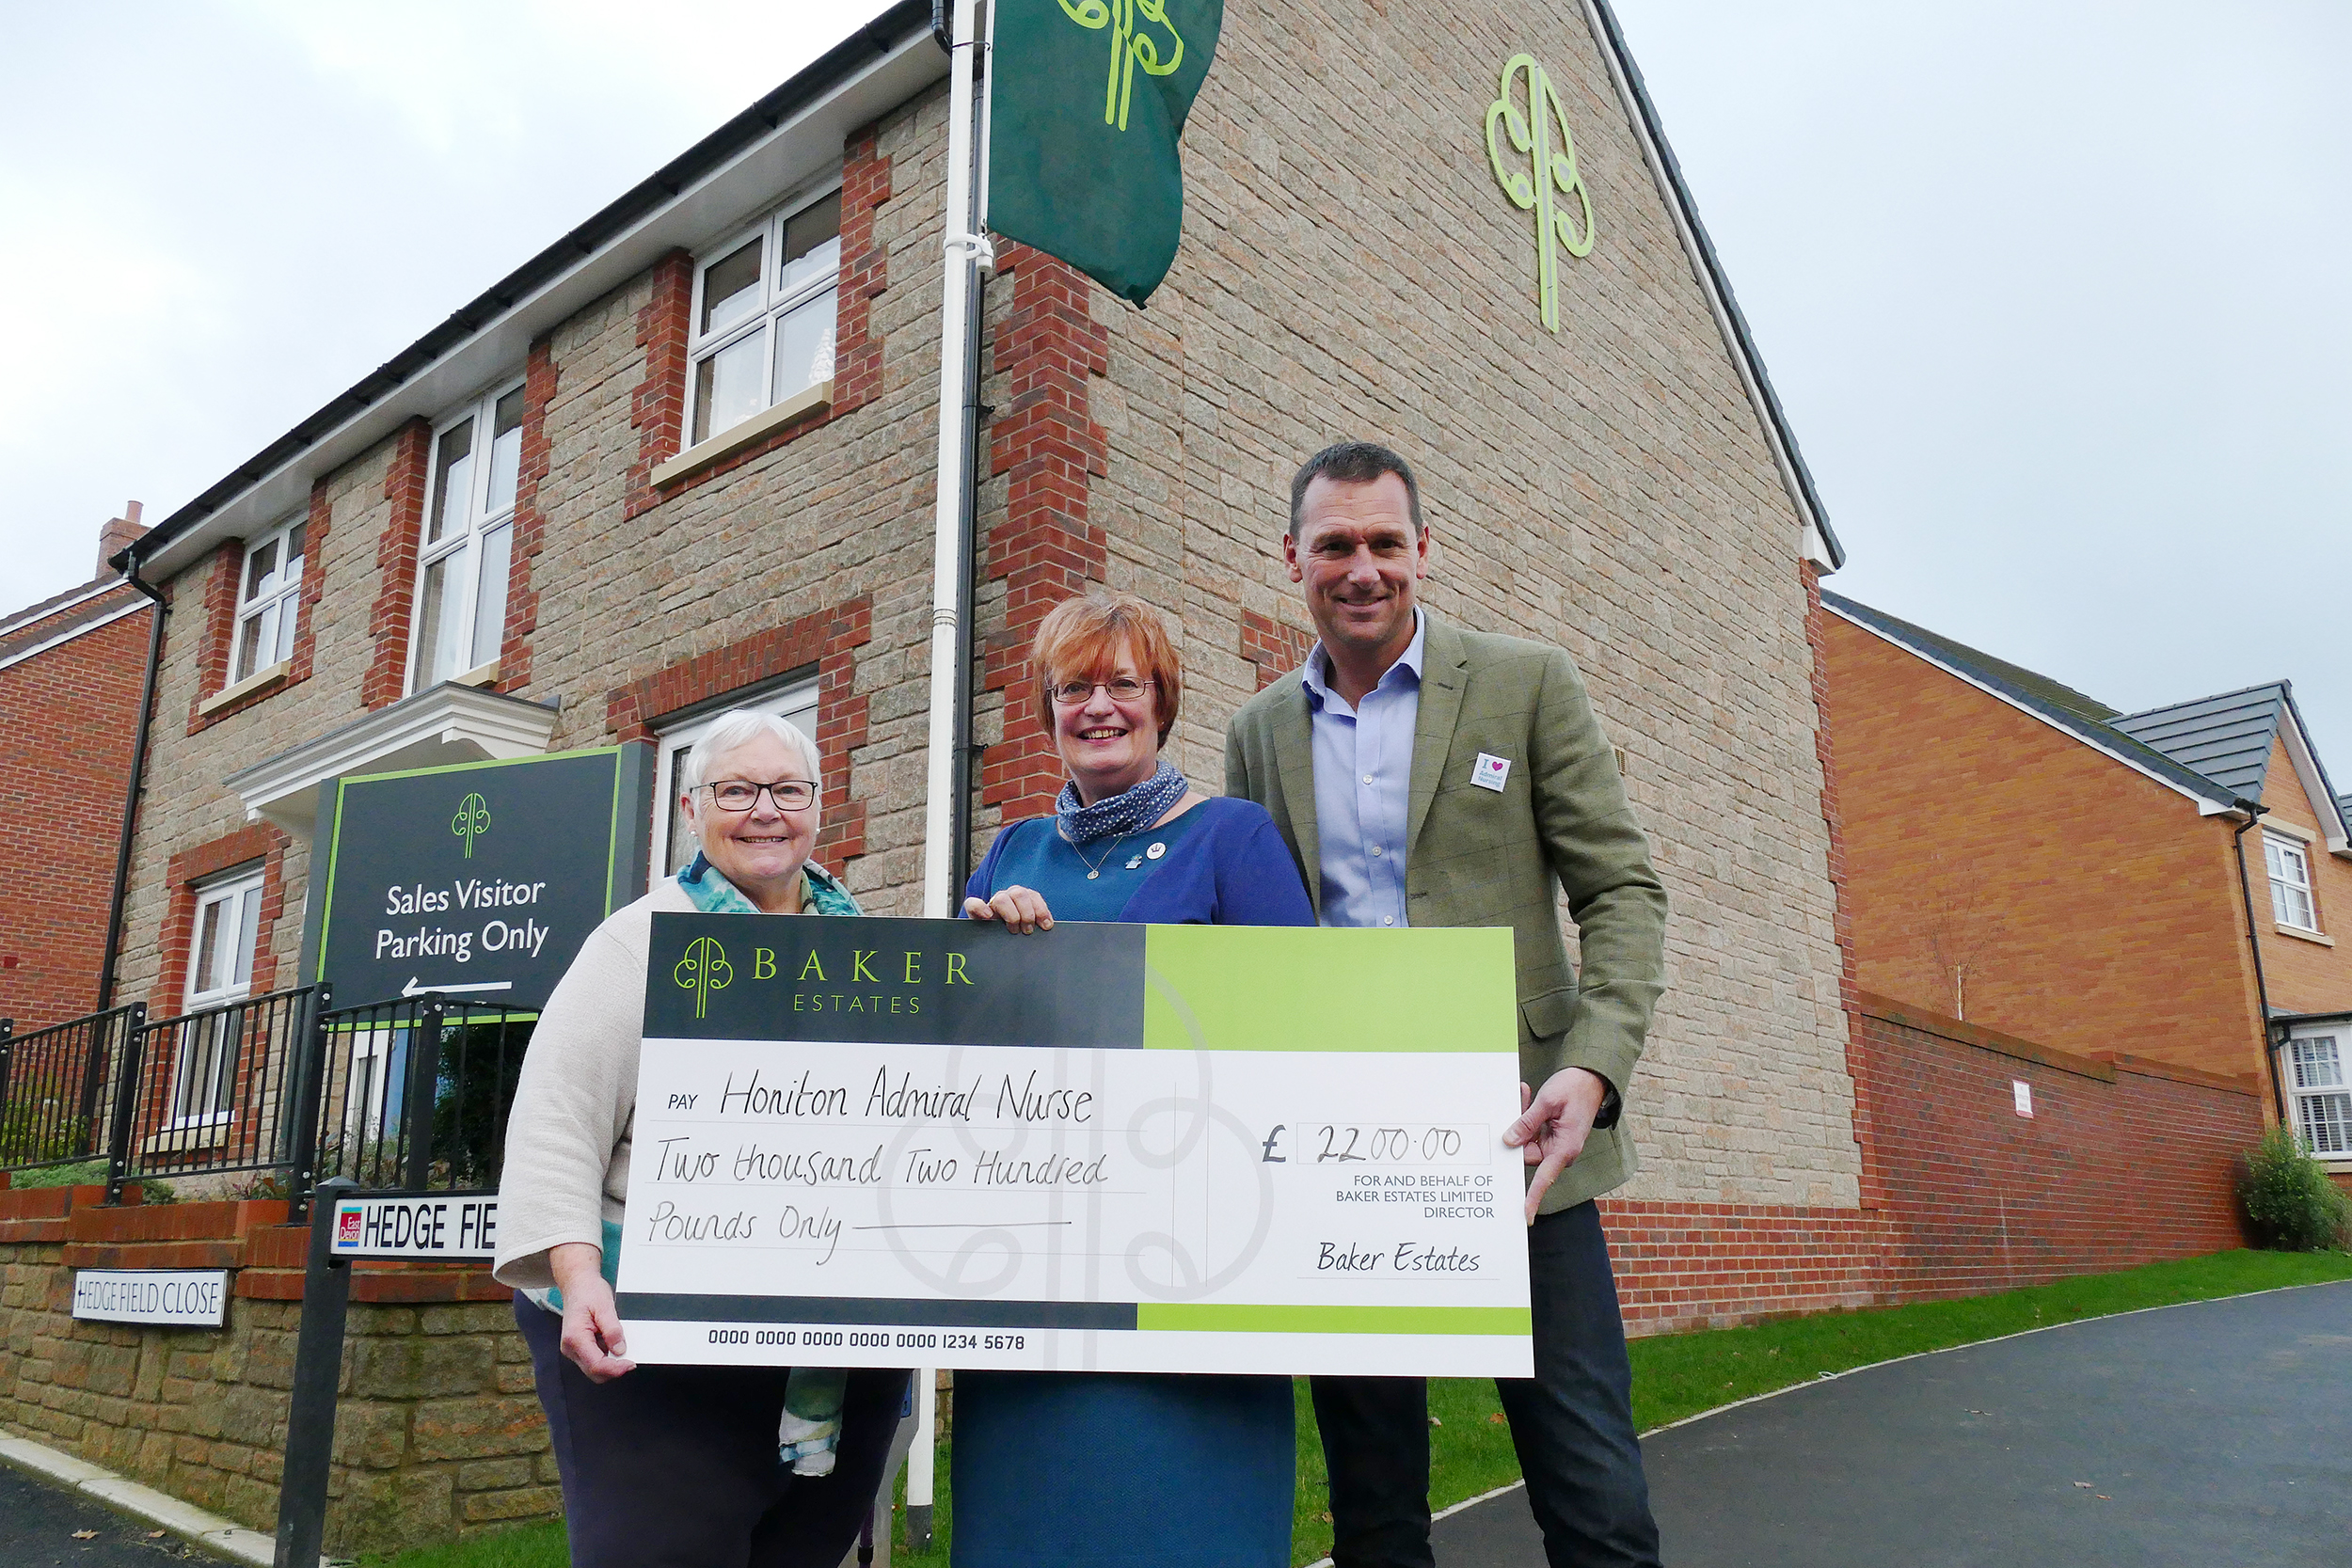 BAKER ESTATES CONTINUE ITS SUPPORT FOR COMMUNITY NURSE IN HONITON